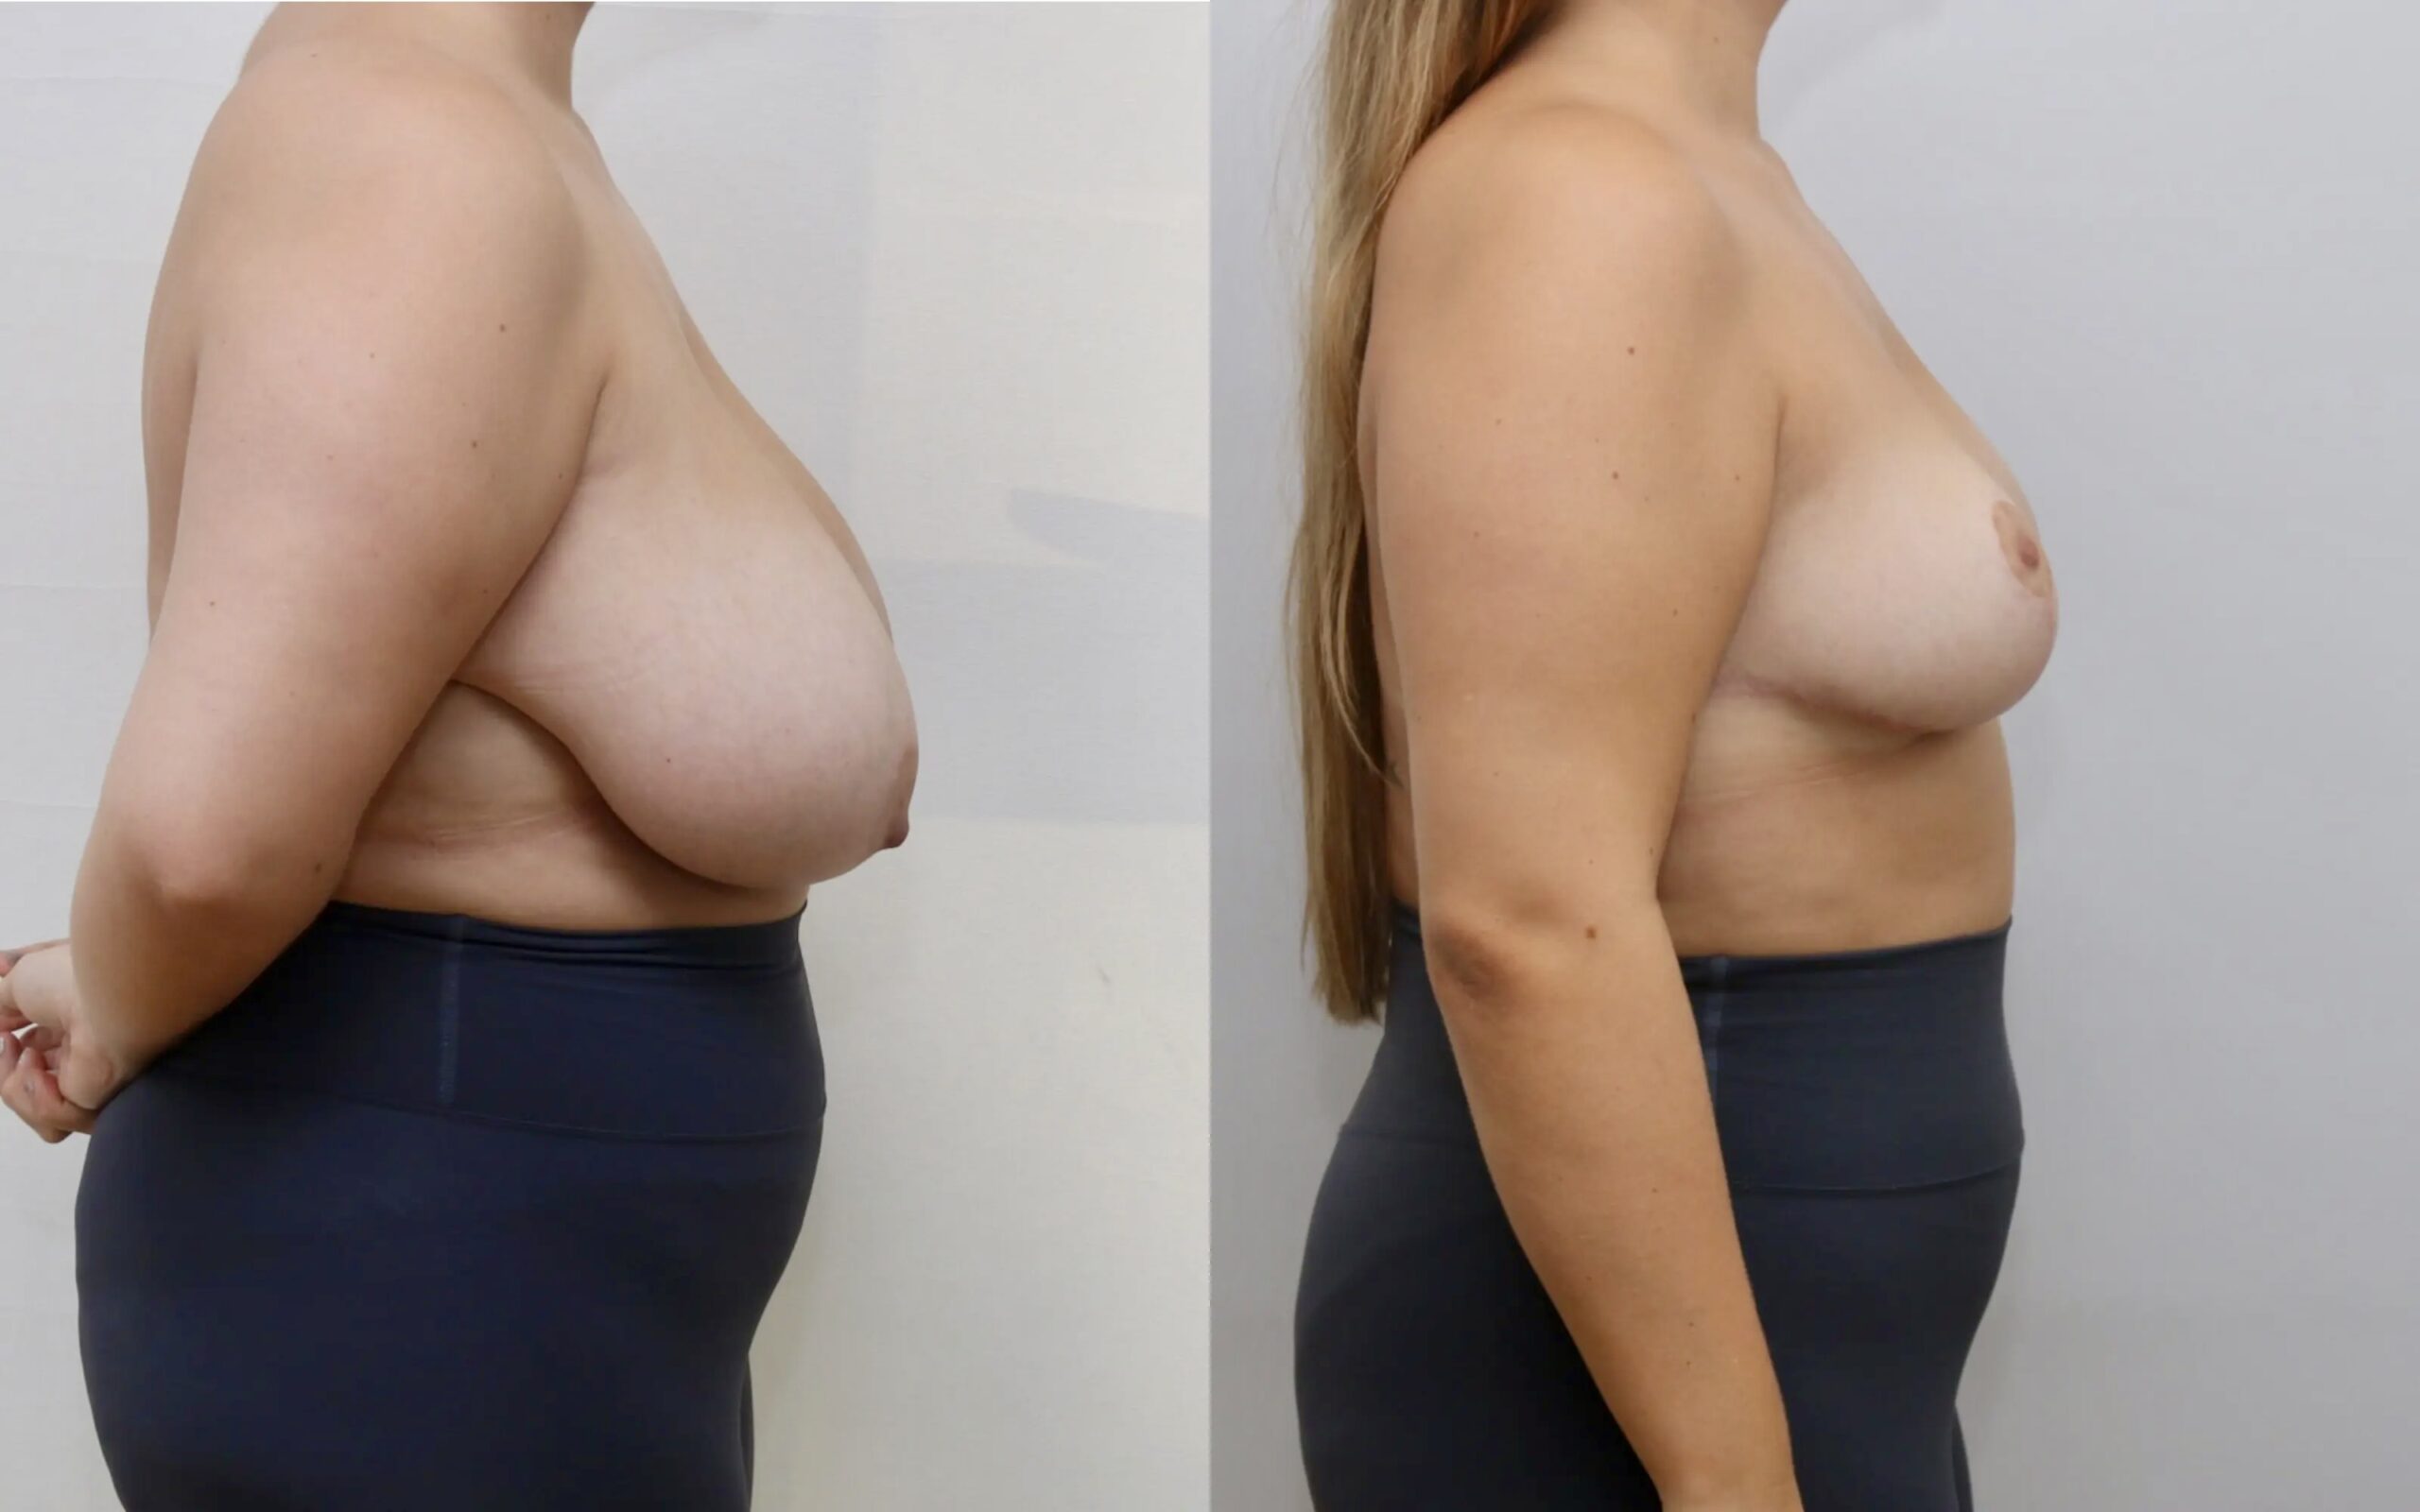 breast reduction before and after 6 months